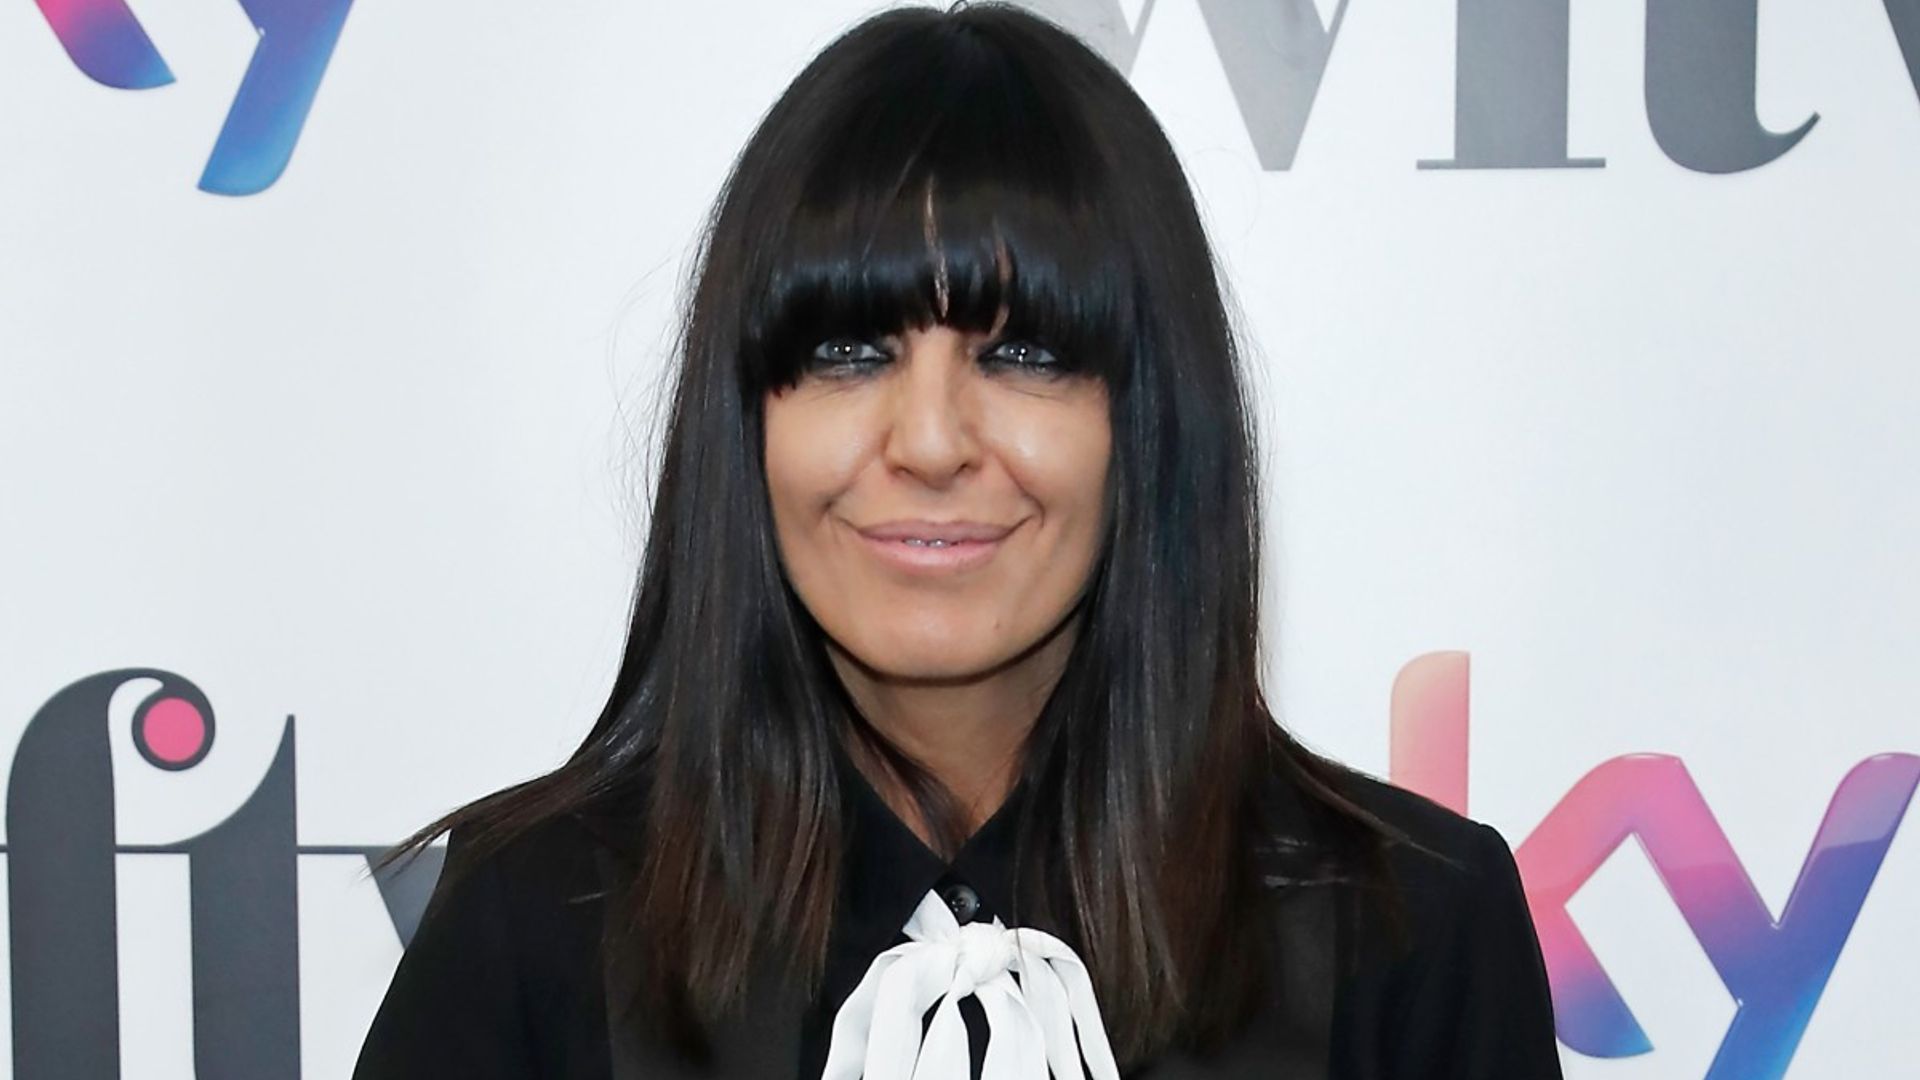 Strictly host Claudia Winkleman shares exciting update about the show ...